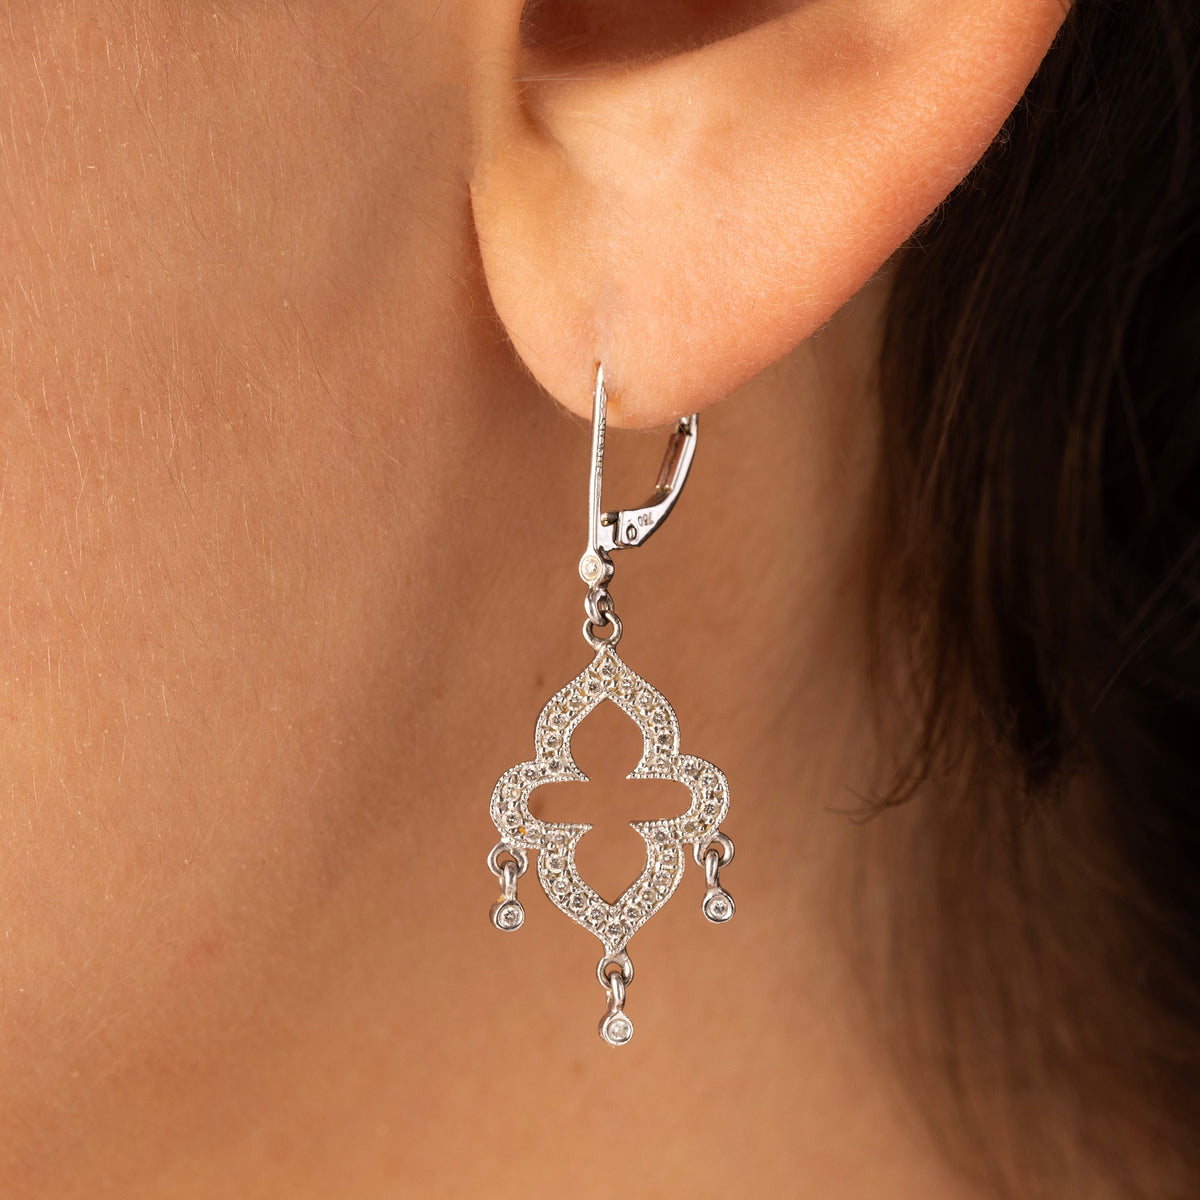 White Gold and Diamonds Earrings